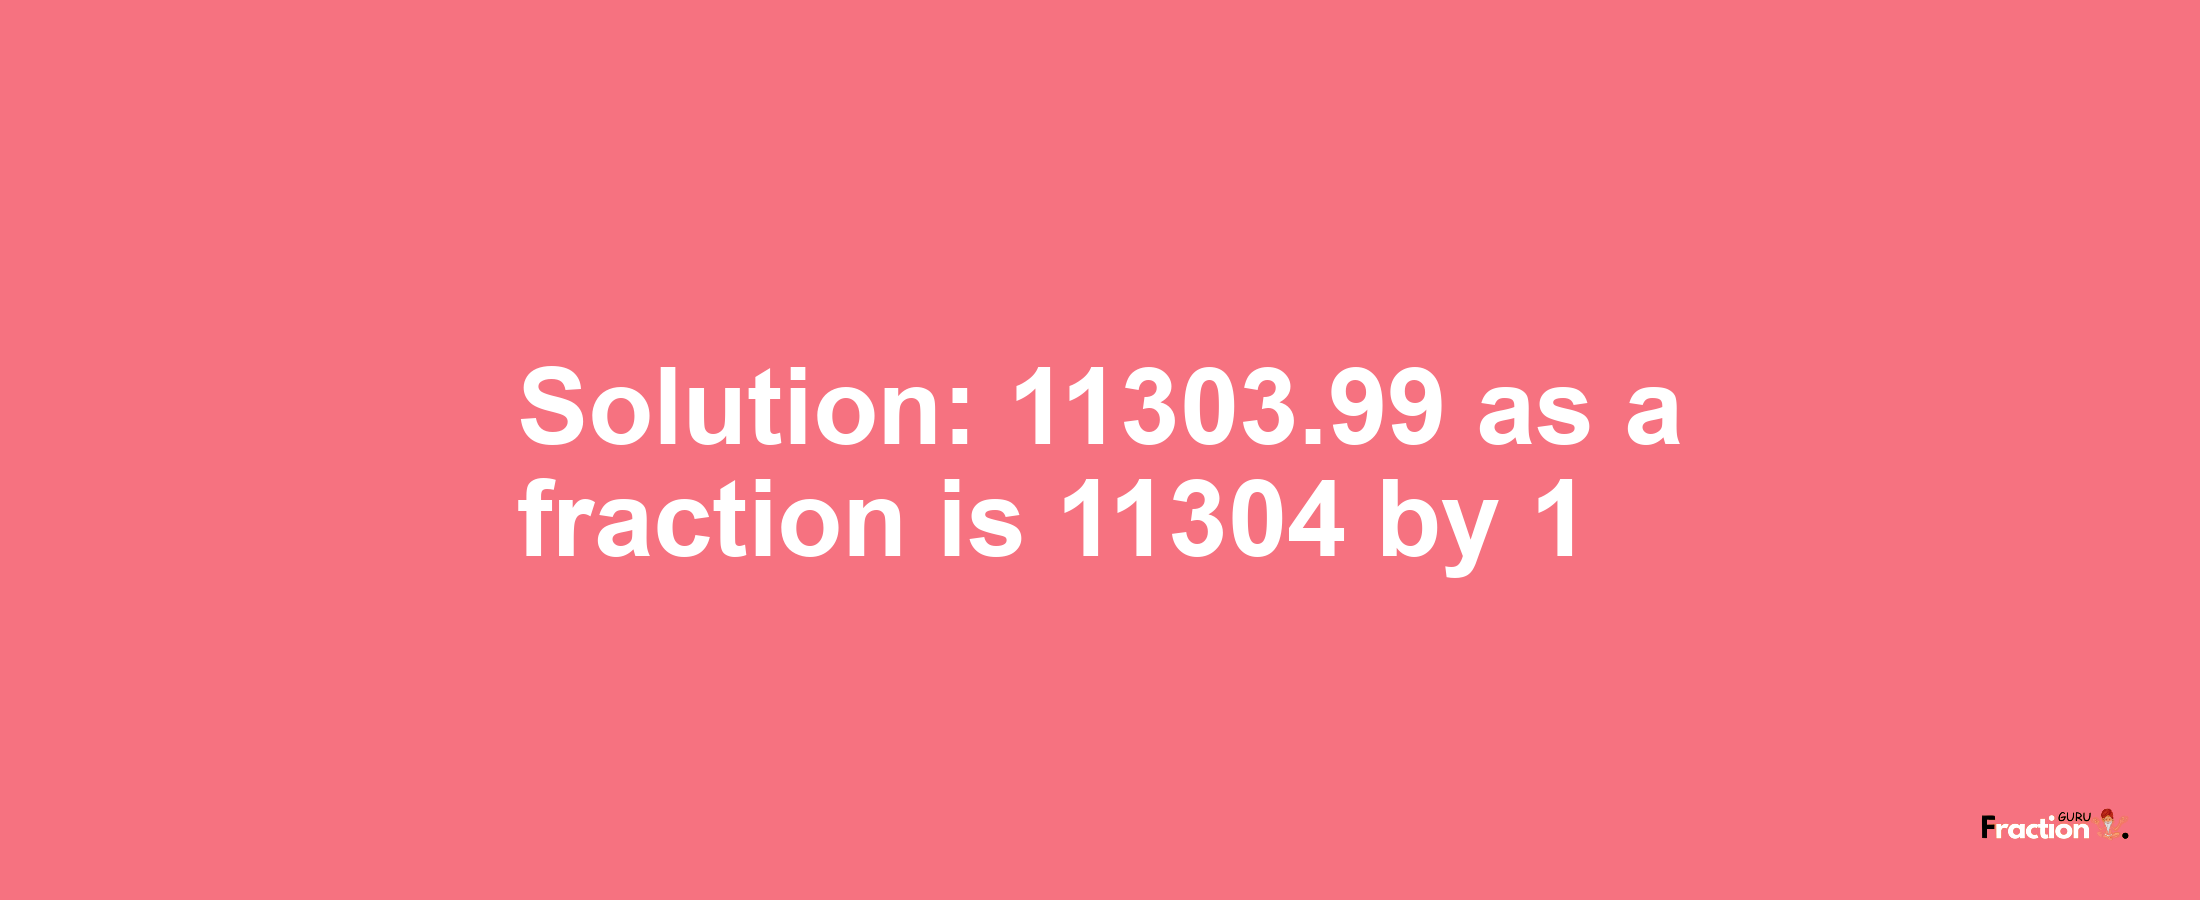 Solution:11303.99 as a fraction is 11304/1